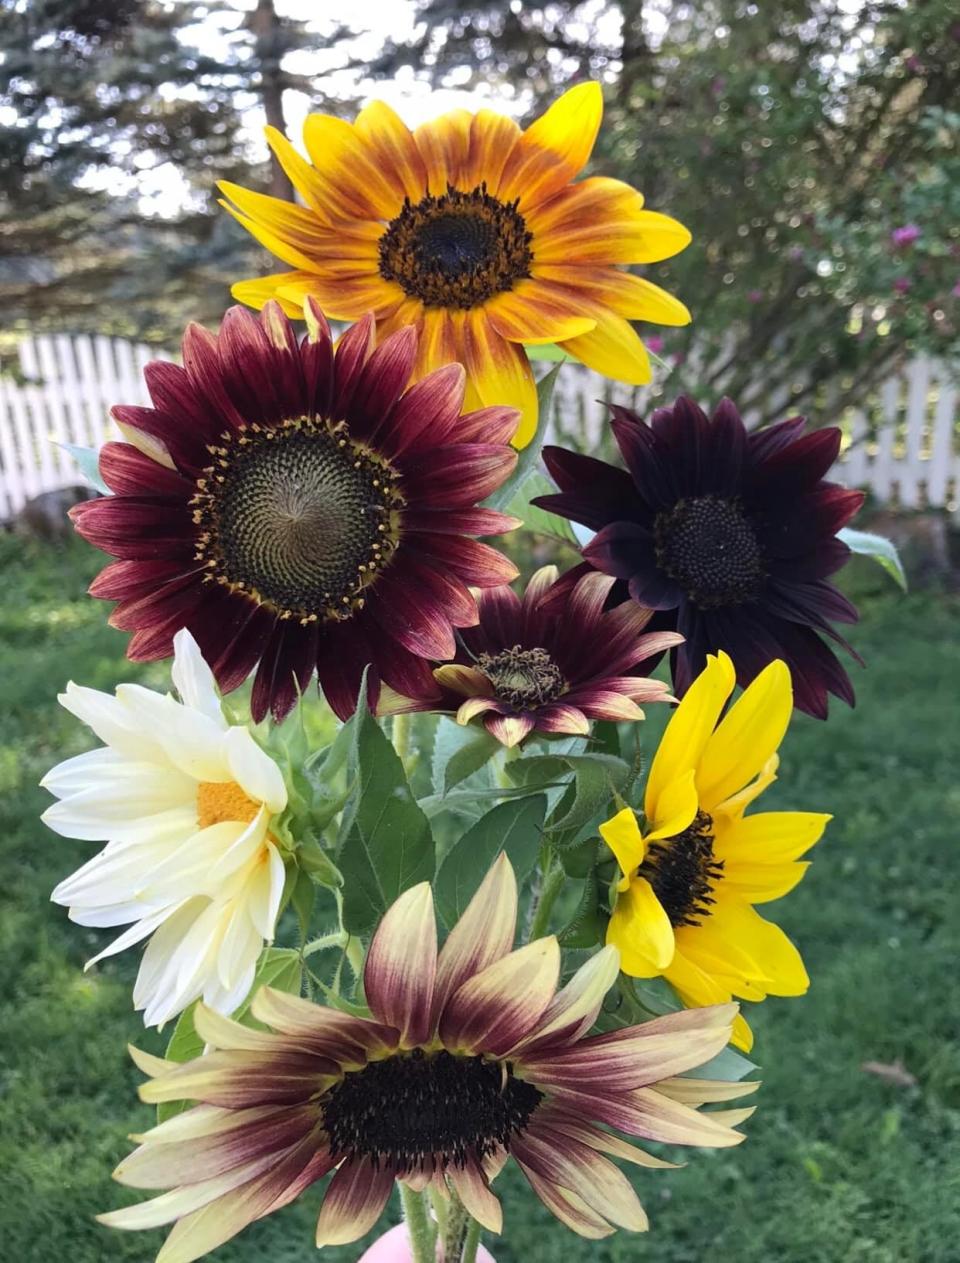 There are about 70 species of sunflowers in the world, with colors ranging from cream to chocolate brown.